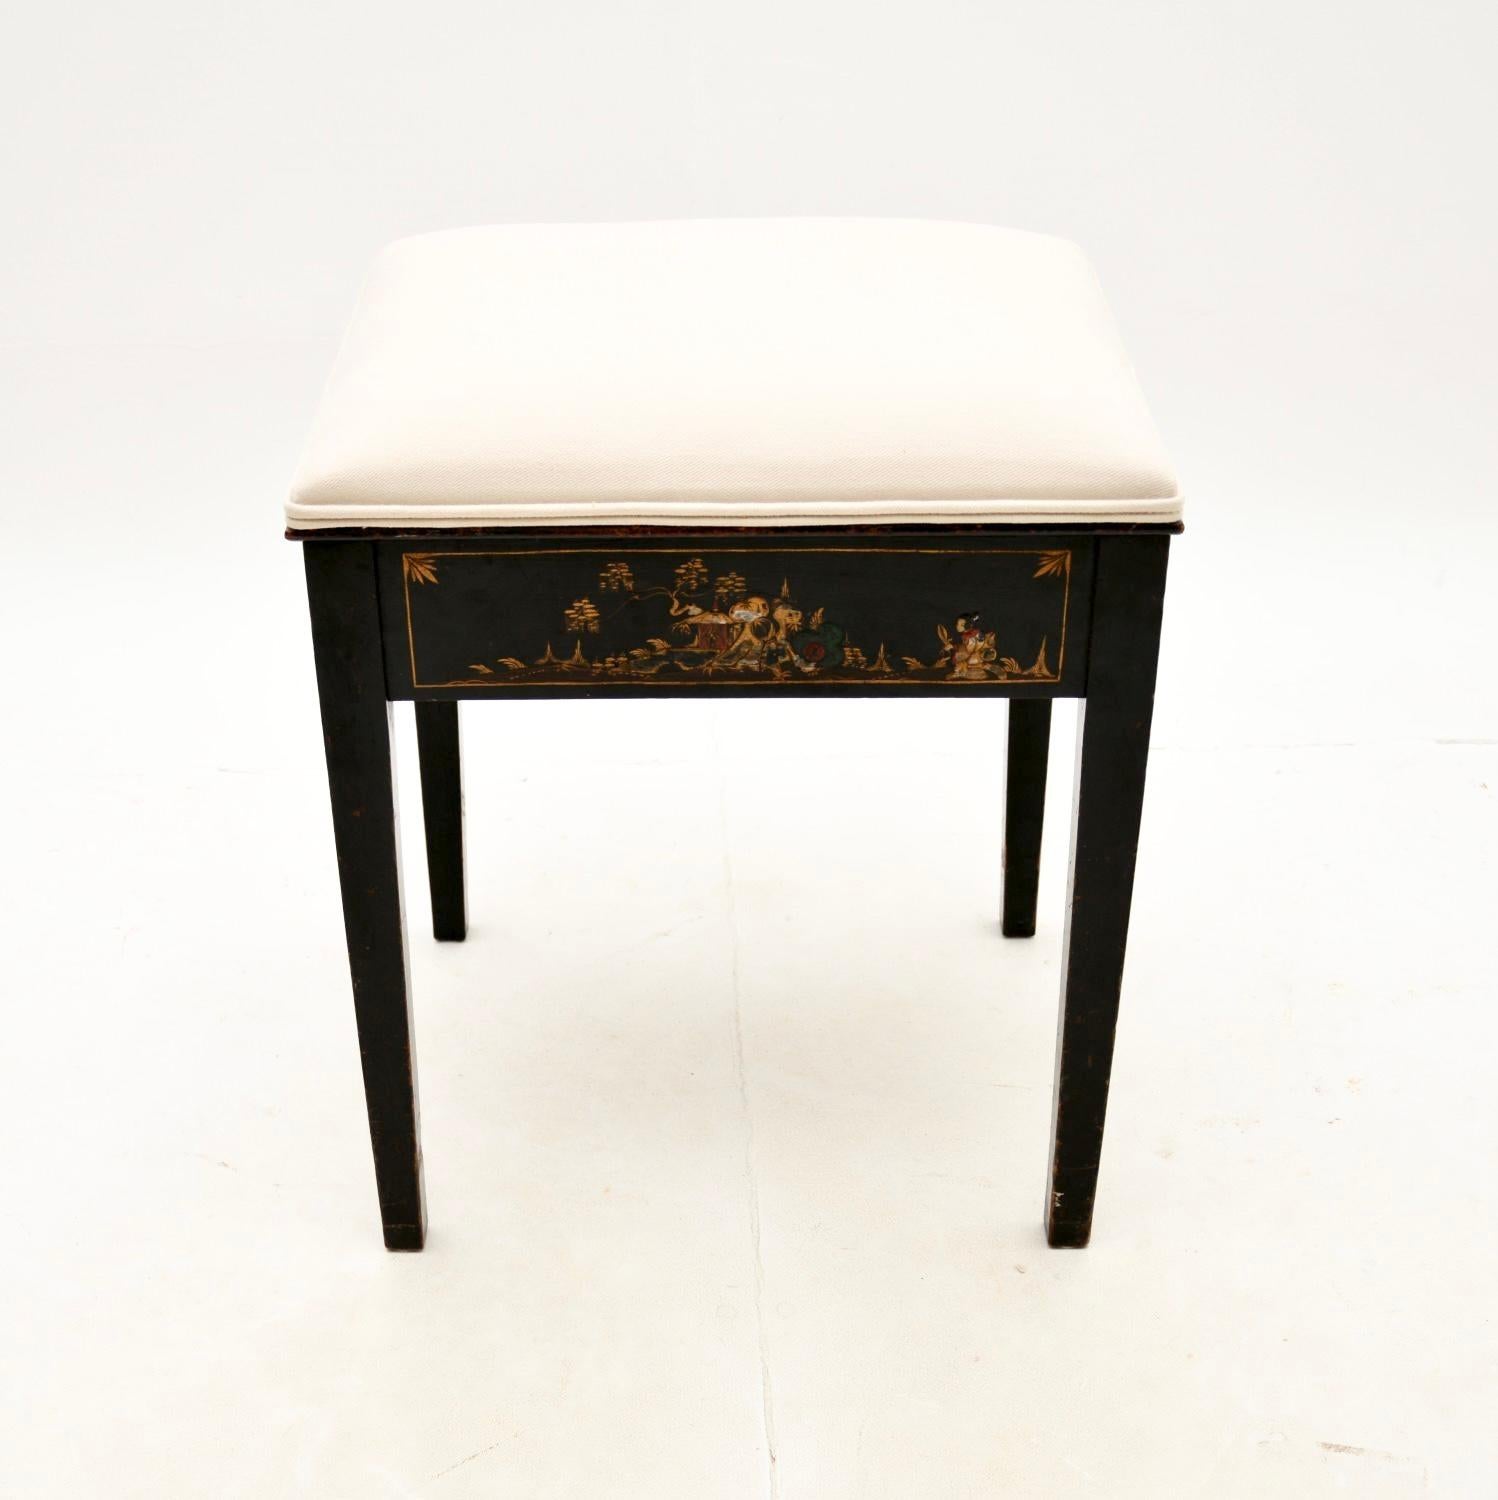 A beautiful antique lacquered chinoiserie piano stool, made in England and dating from the 1920’s.

This is of superb quality and is a great size for use as a single piano stool or as an occasional stool around the home. It has gorgeous lacquered